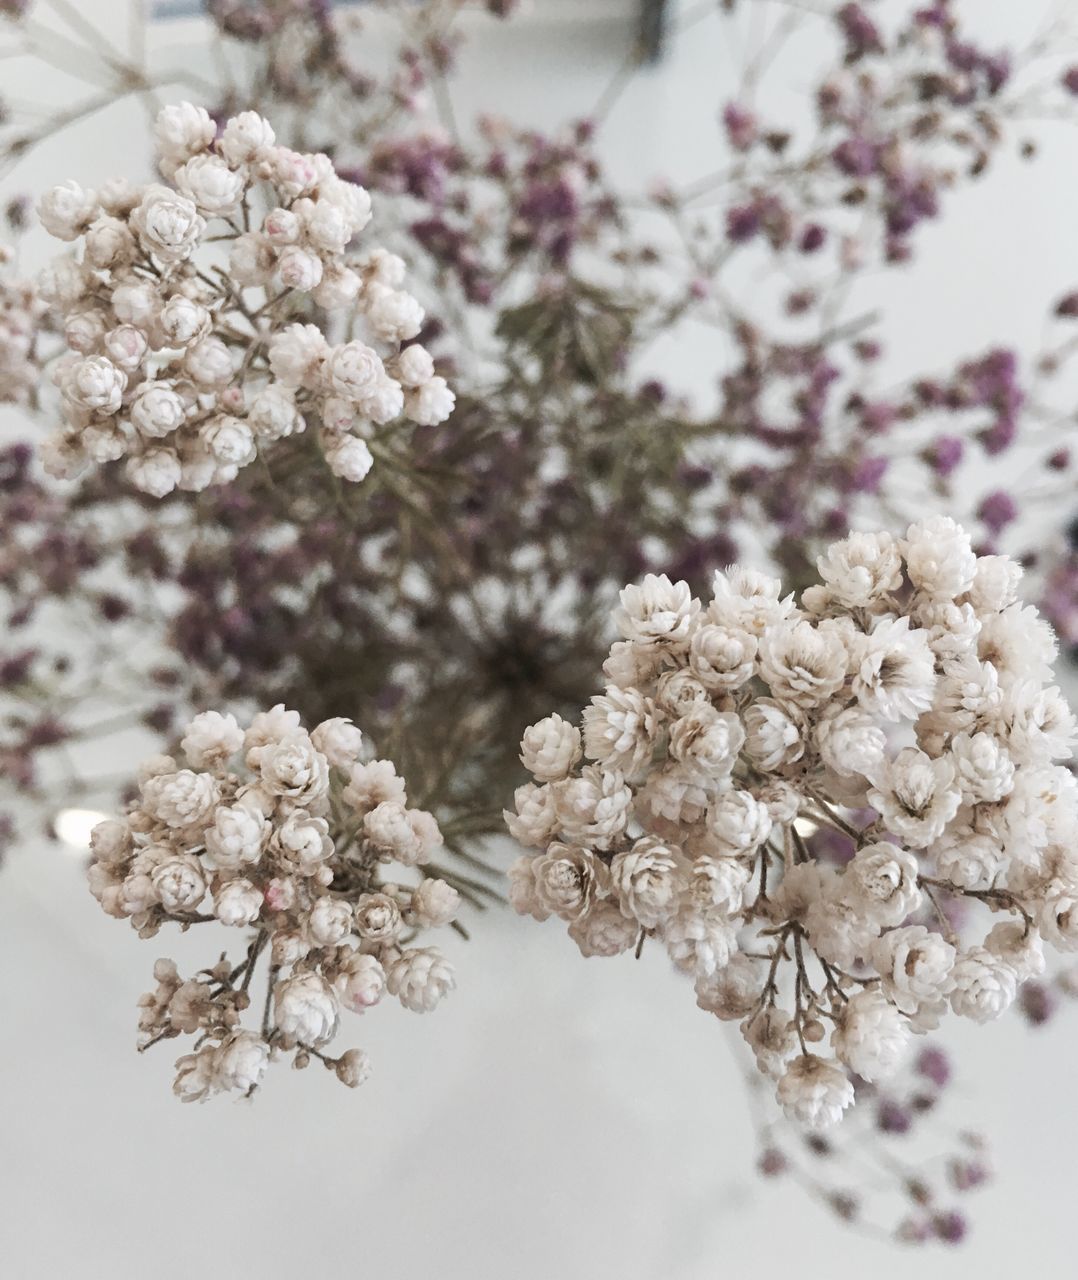 flower, freshness, fragility, cherry blossom, beauty in nature, close-up, growth, petal, white color, nature, blossom, cherry tree, branch, focus on foreground, tree, bunch of flowers, season, selective focus, springtime, in bloom